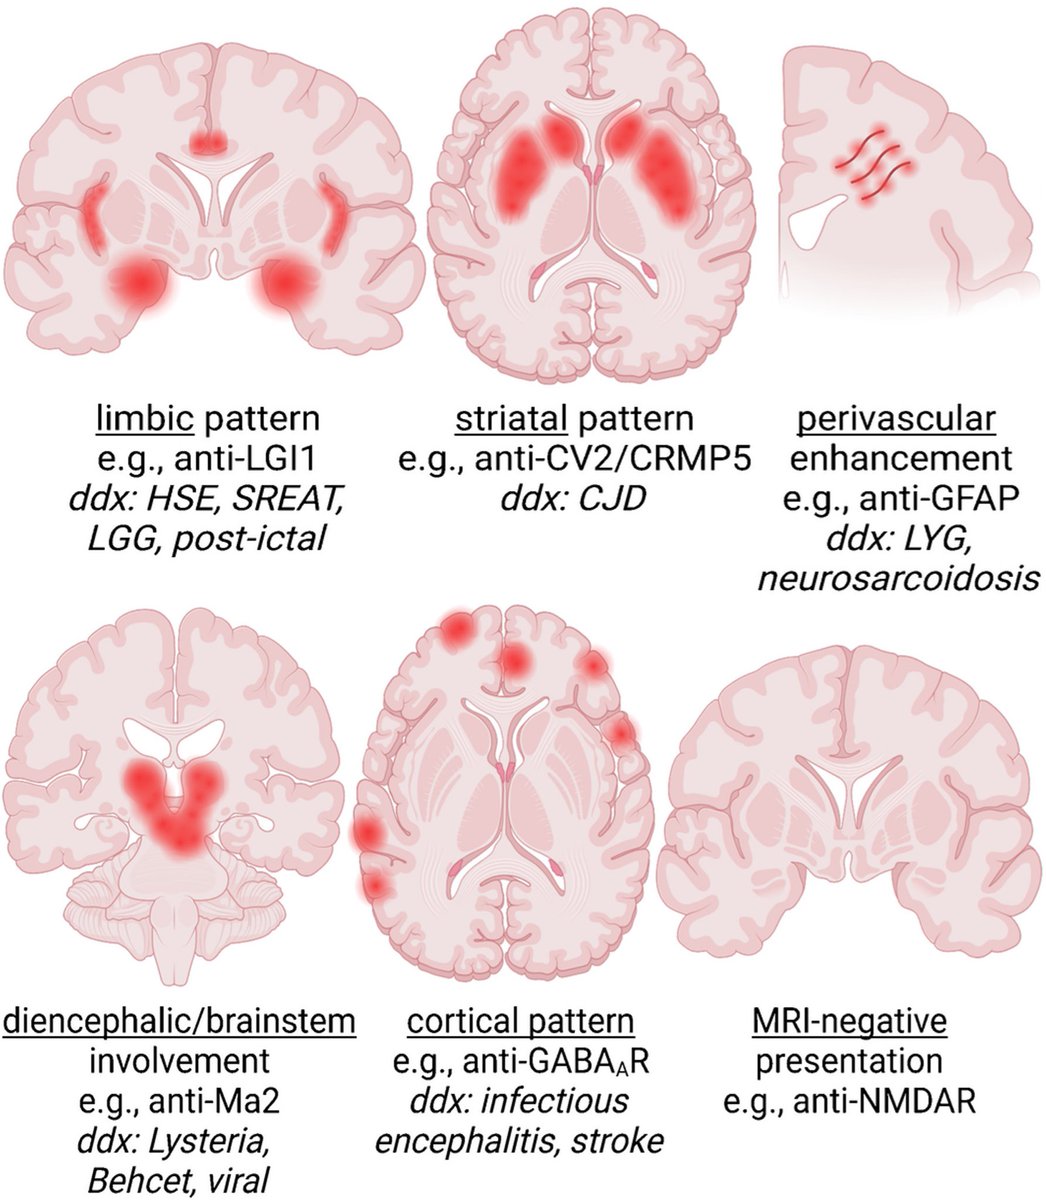 A #TWEETORIAL based on a @radiology_rsna article, A🧵:

1/10

Autoimmune encephalitis (AE) is not rare! one study showed that among persons<30 years old AE was more common than any single infectious cause 🤯 Even HSV-1! Here are some common imaging patterns from @TheAJNR